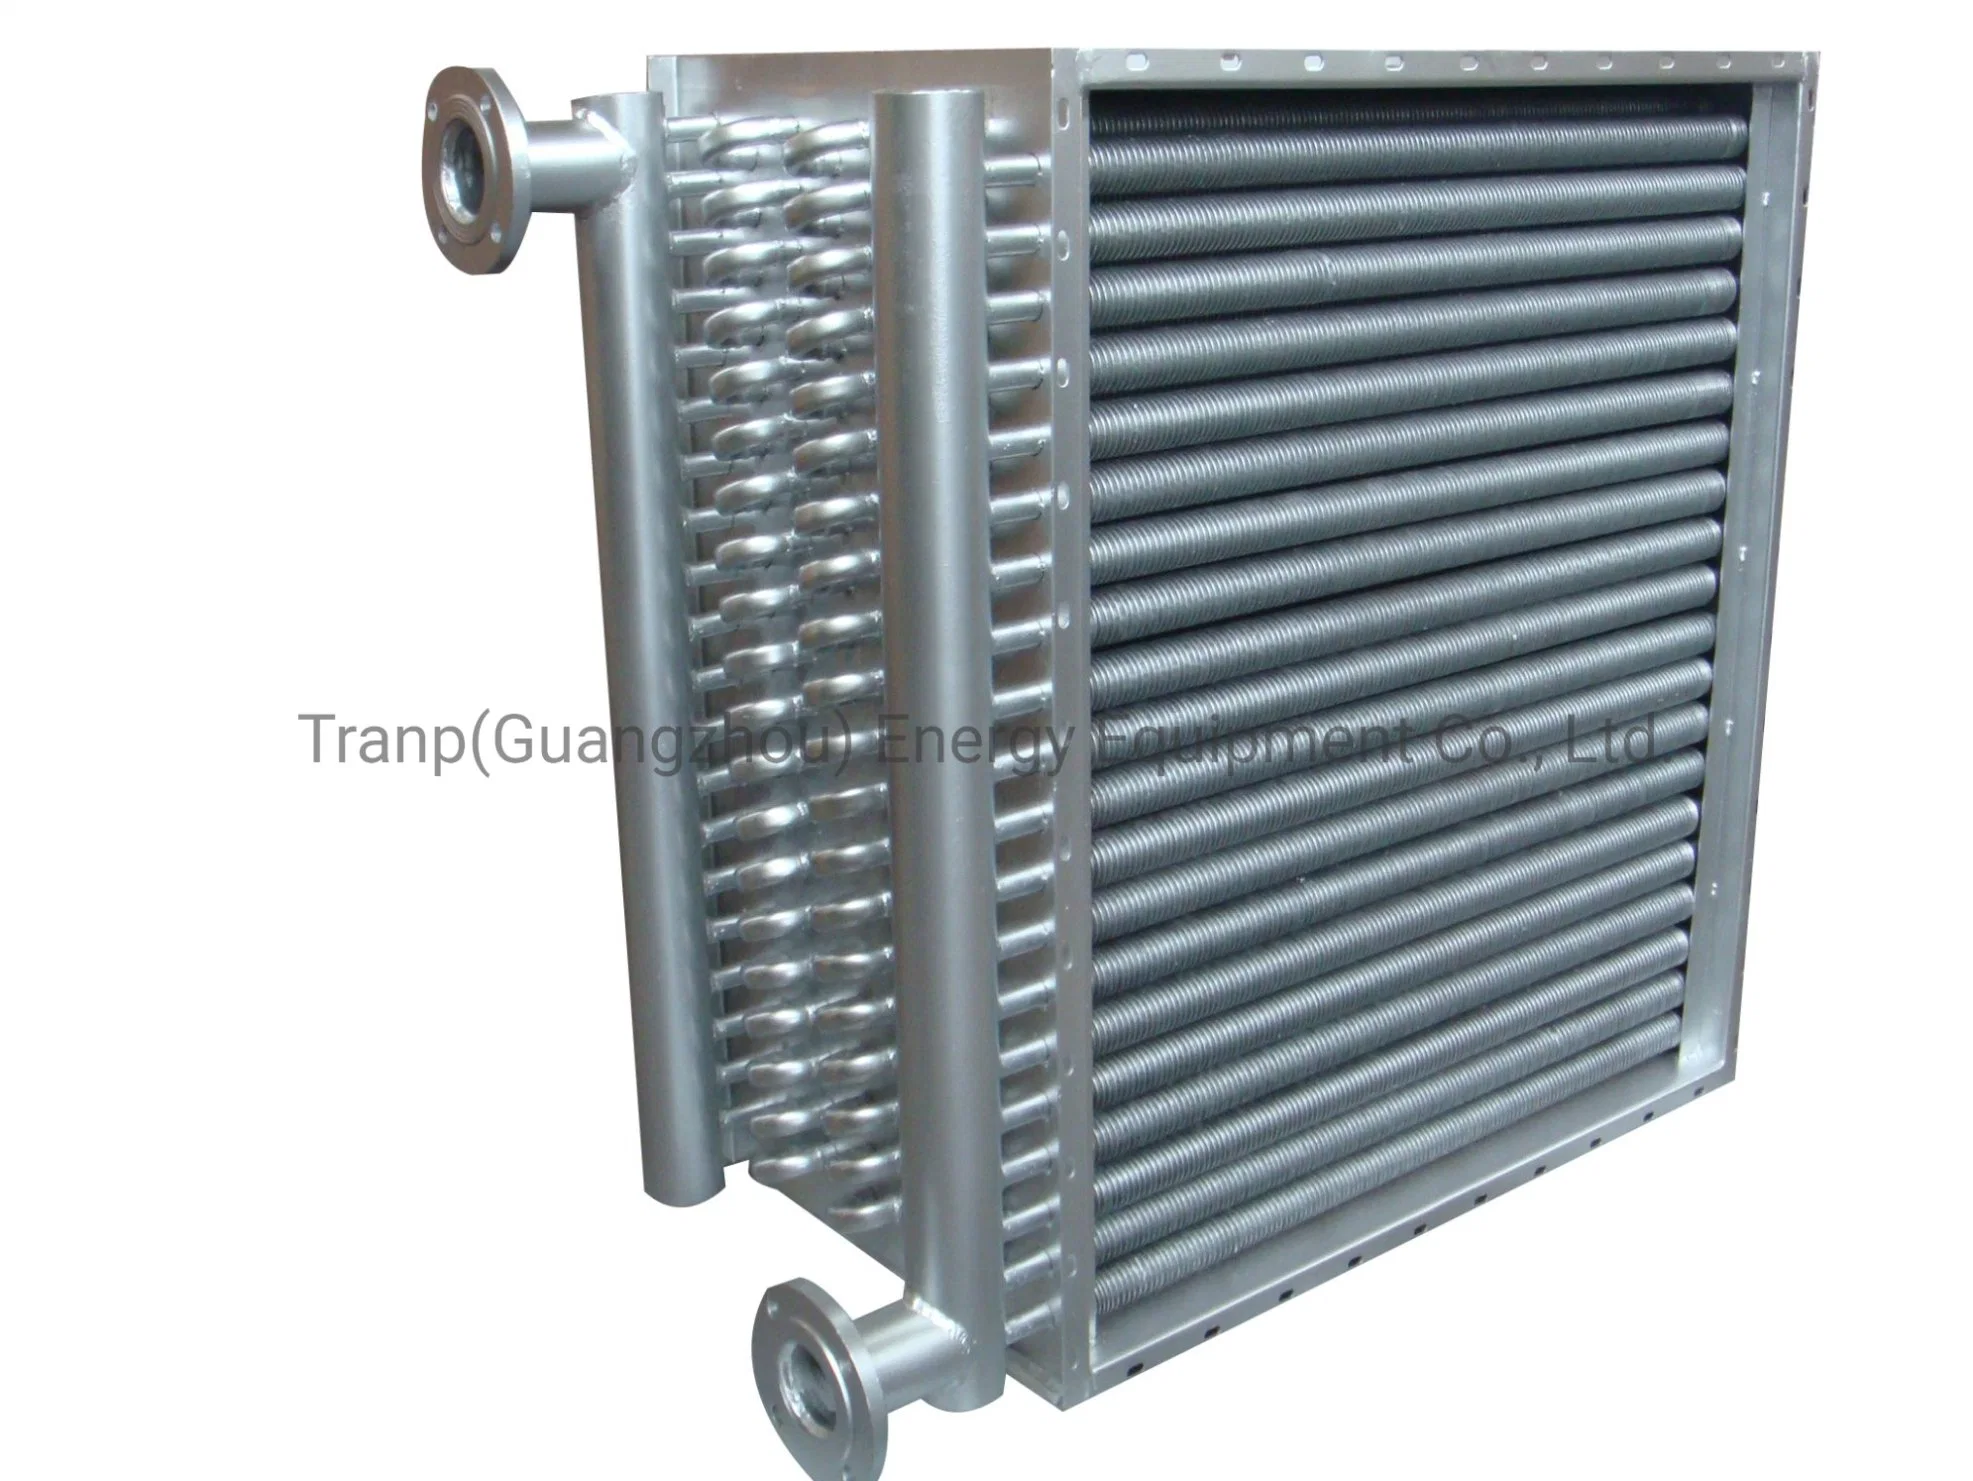 Spiral Fin Radiator of Heat Exchanger of Heating and Cooling for Industry